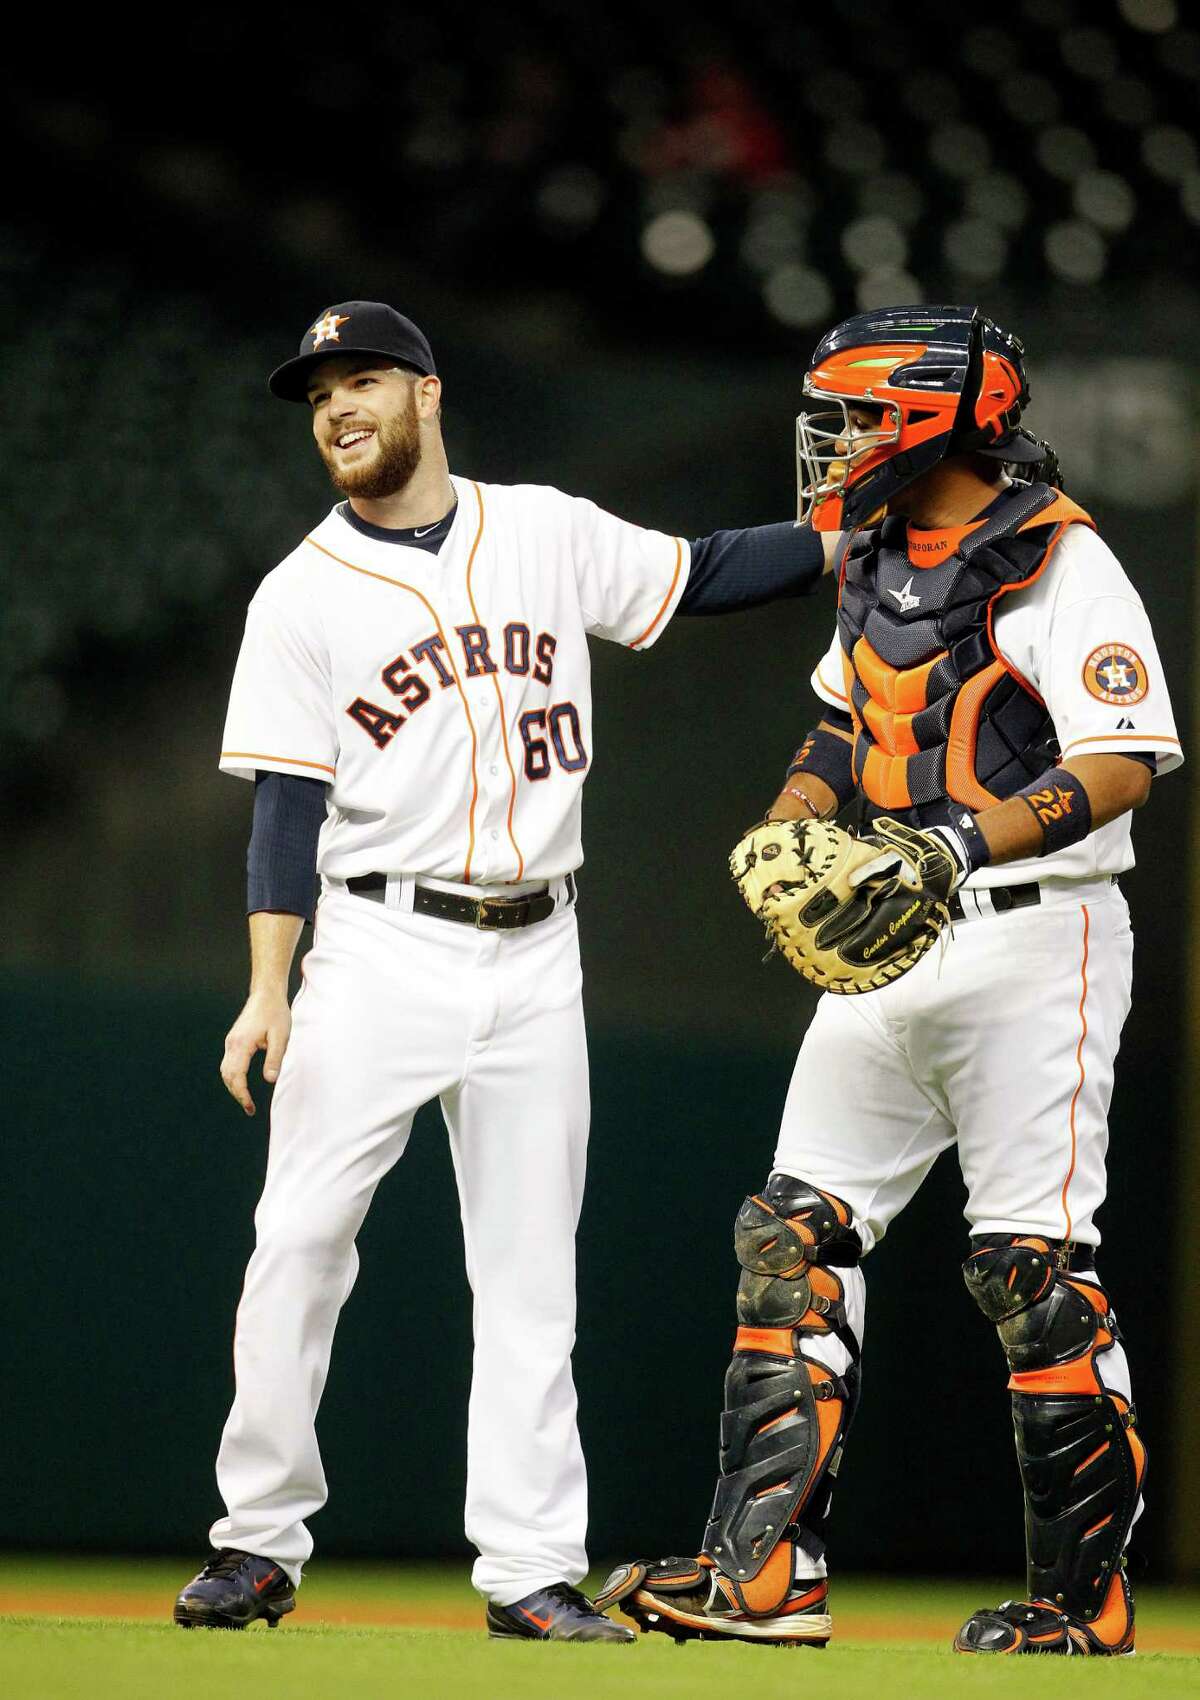 Dallas Keuchel, left, gets the last laugh and congratulations from catcher Carlos Corporan after lasting longer than any Astros pitcher had this season. Keuchel shut out the Rangers on seven hits Tuesday night for the team's first complete game.